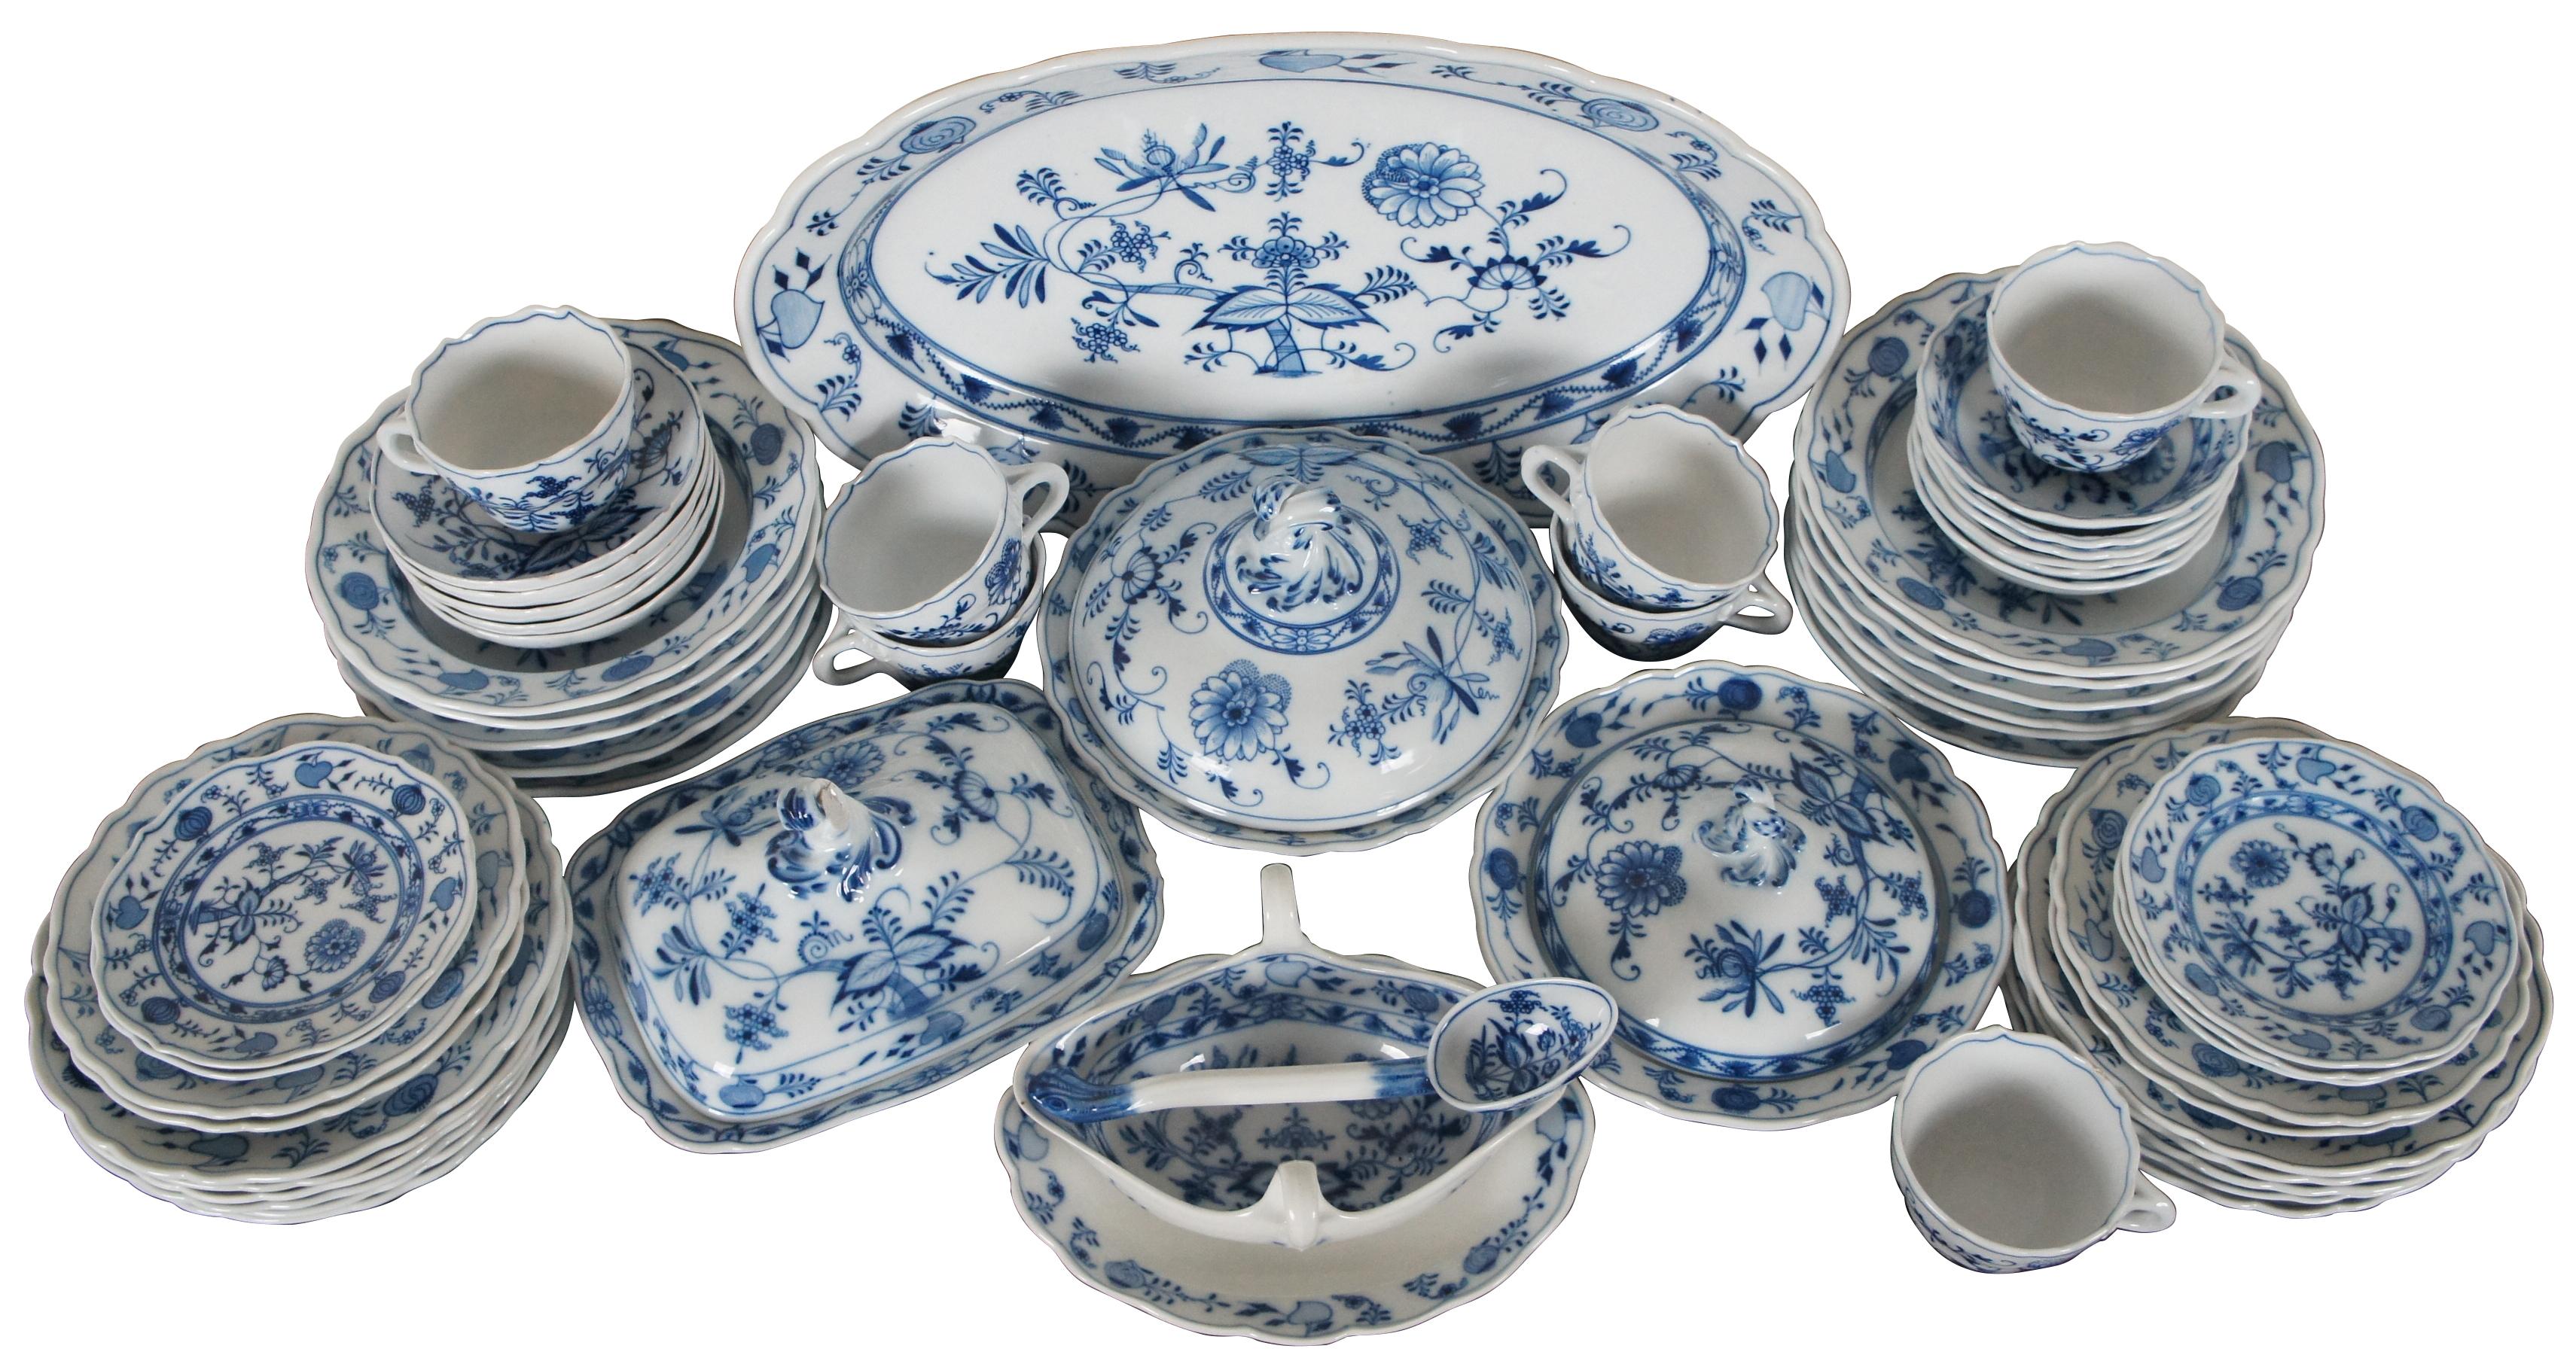 Vintage 58 piece set of flow blue porcelain Meissen dinnerware in the Blue Onion pattern.

Measures: Oval Platter - 19” x 12.5” x 2.5” / Lidded Rectangular Dish - 9.5” x 7.5” x 5.625” / Round Dish Large Lid - 9.25” x 6” / Round Dish Small Lid - 9”